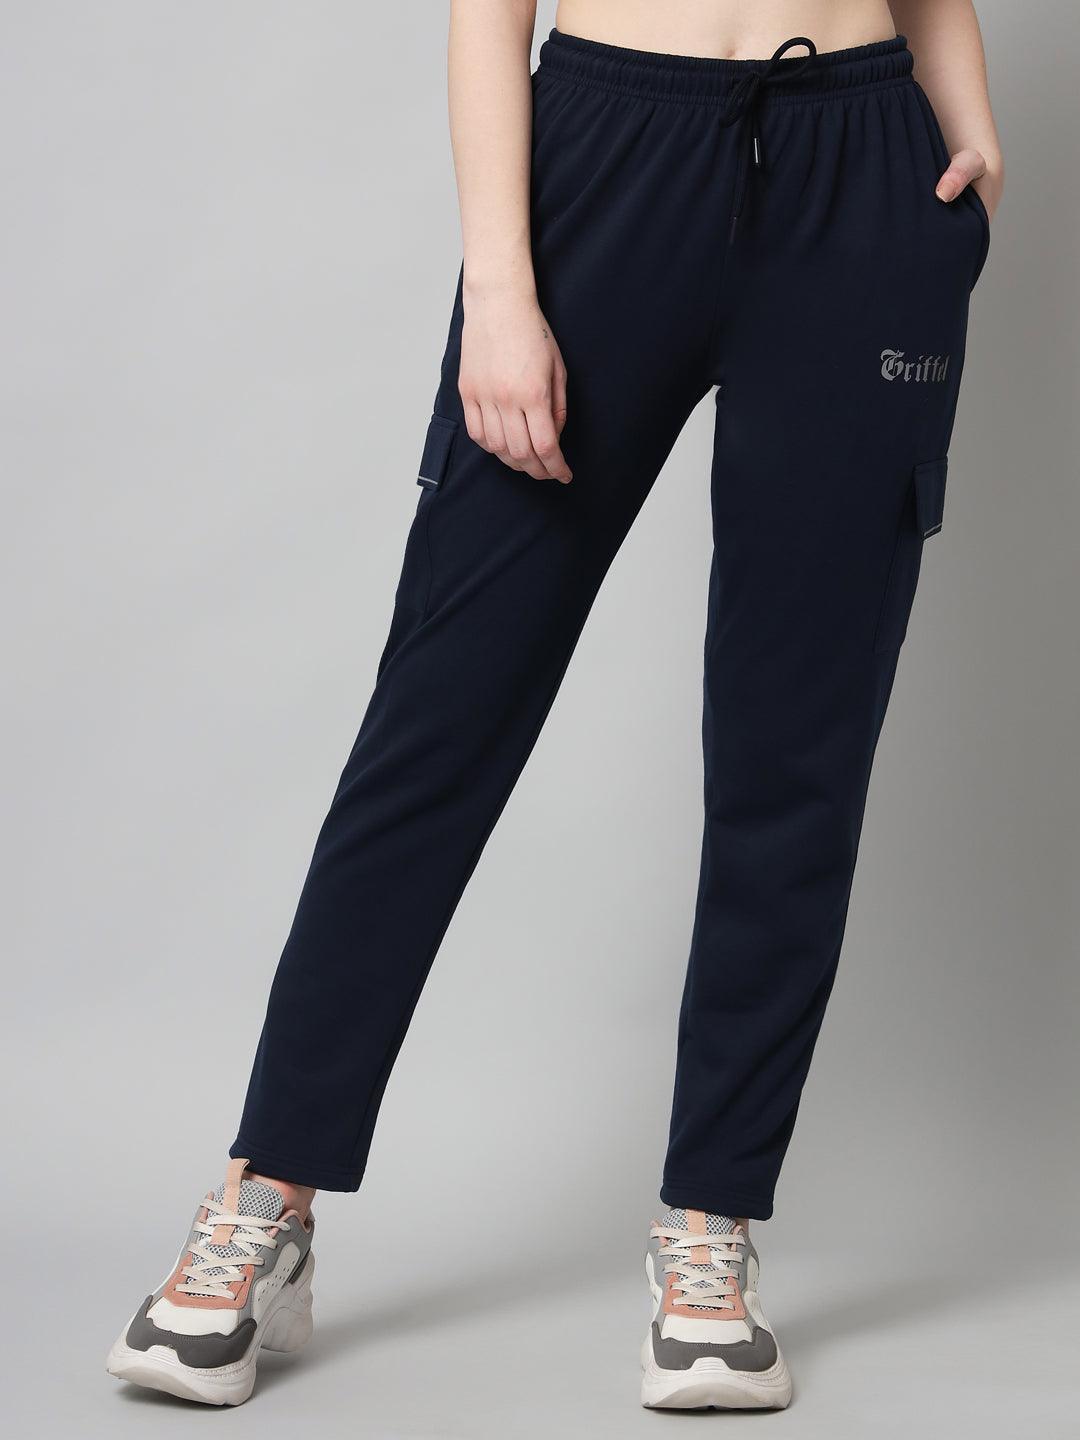 Griffel Women’s Front Logo 6 Pocket Grey Navy Trackpant - griffel